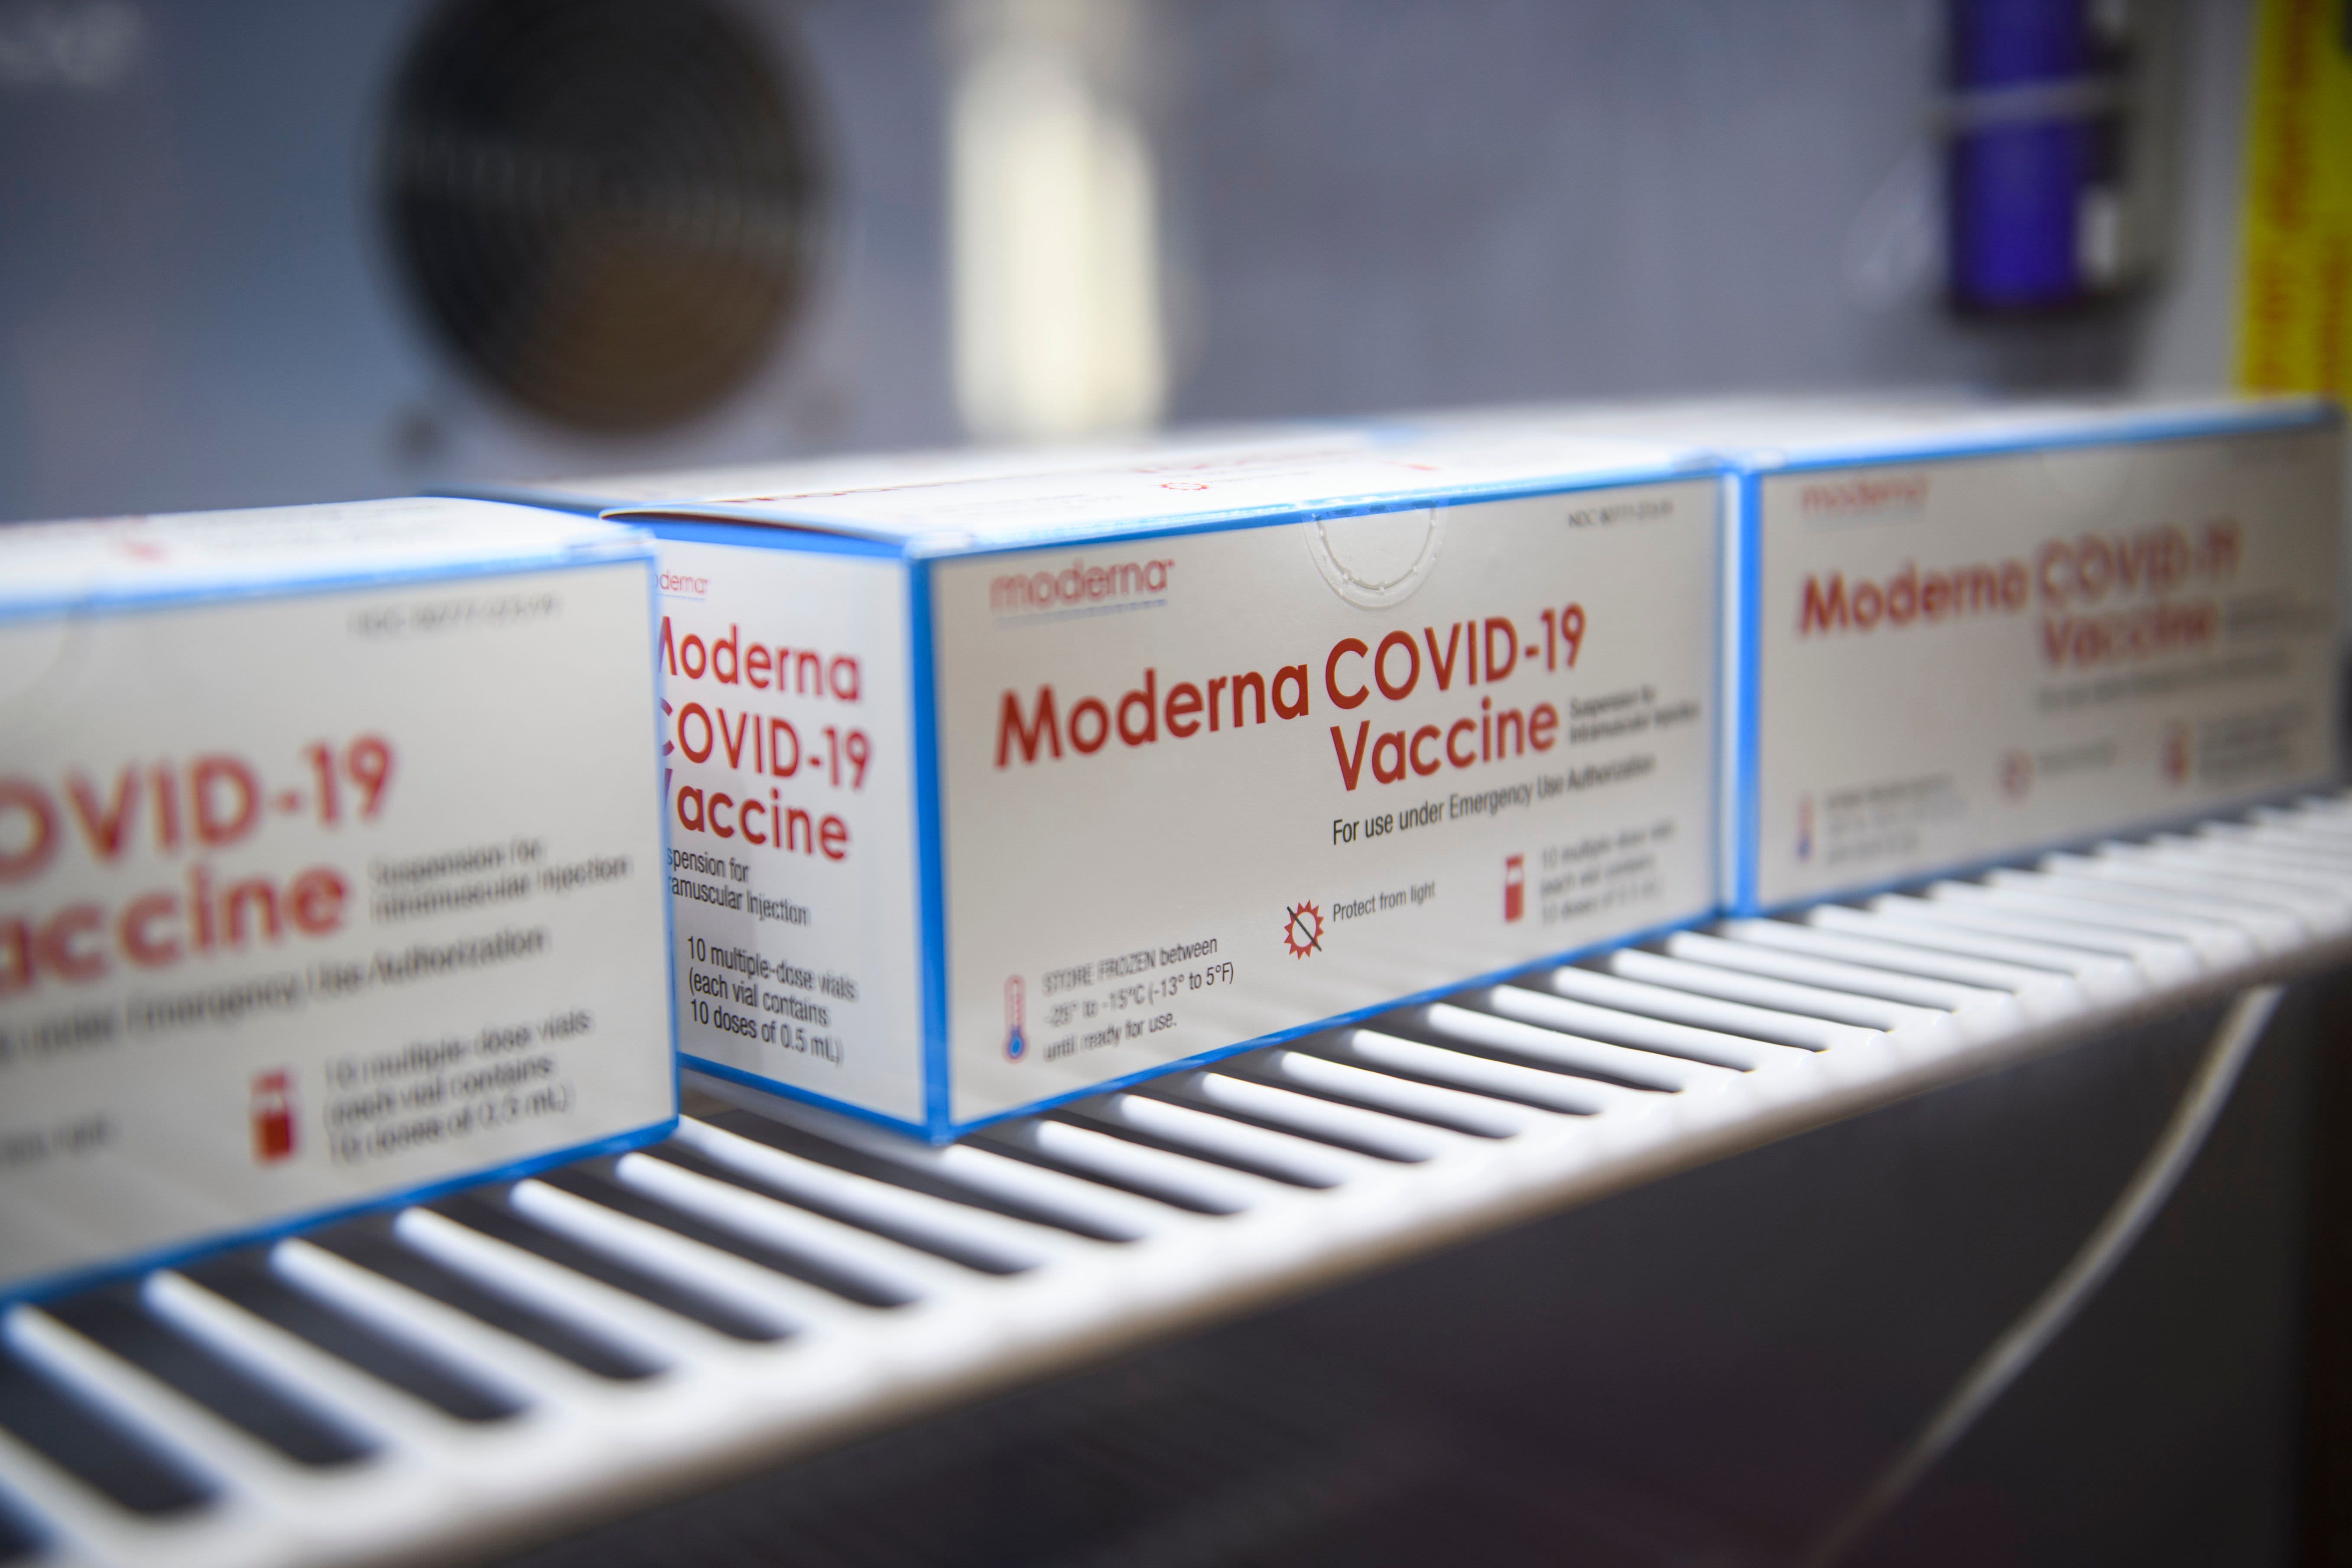 Moderna Covid vaccine can remain stable at refrigerated temperatures for 3 months, company says